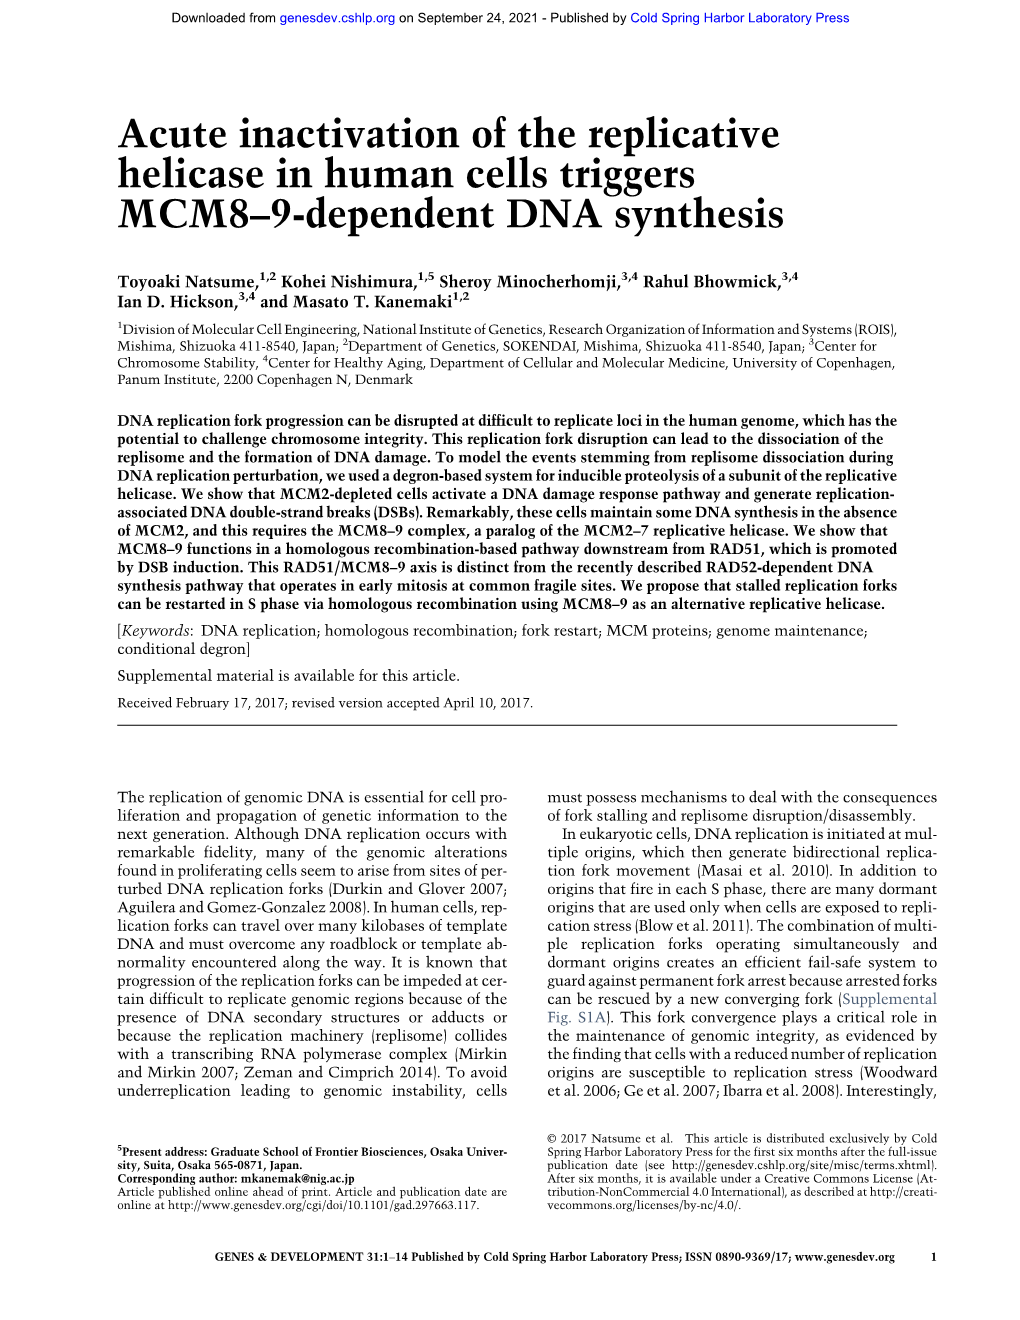 Acute Inactivation of the Replicative Helicase in Human Cells Triggers MCM8–9-Dependent DNA Synthesis